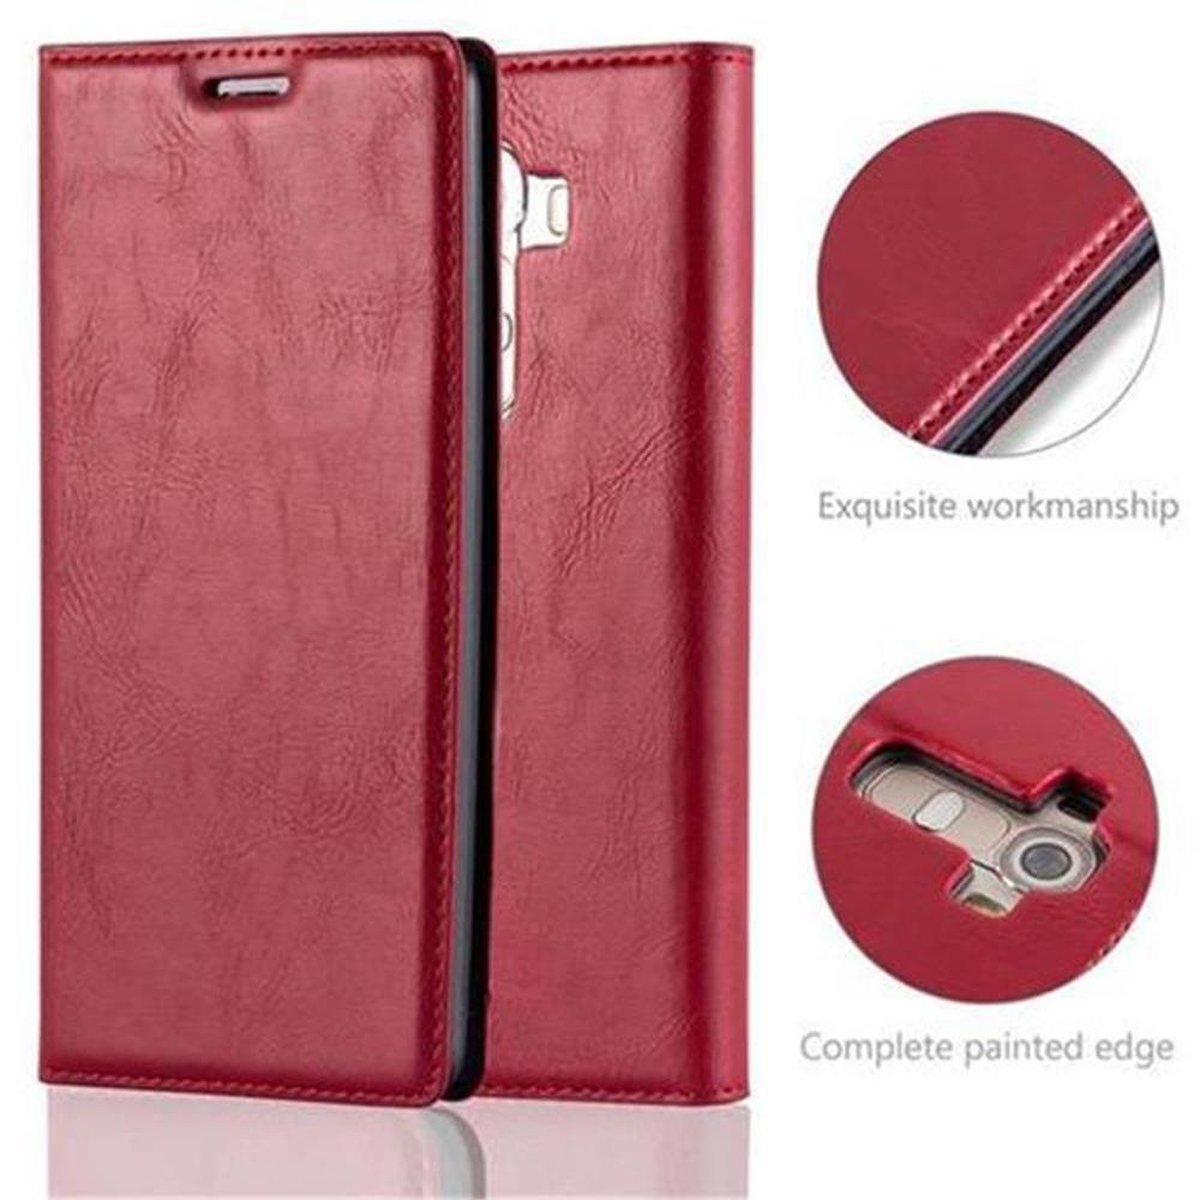 / LG, G4 Magnet, Hülle PLUS, ROT APFEL Book Invisible CADORABO G4 Bookcover,